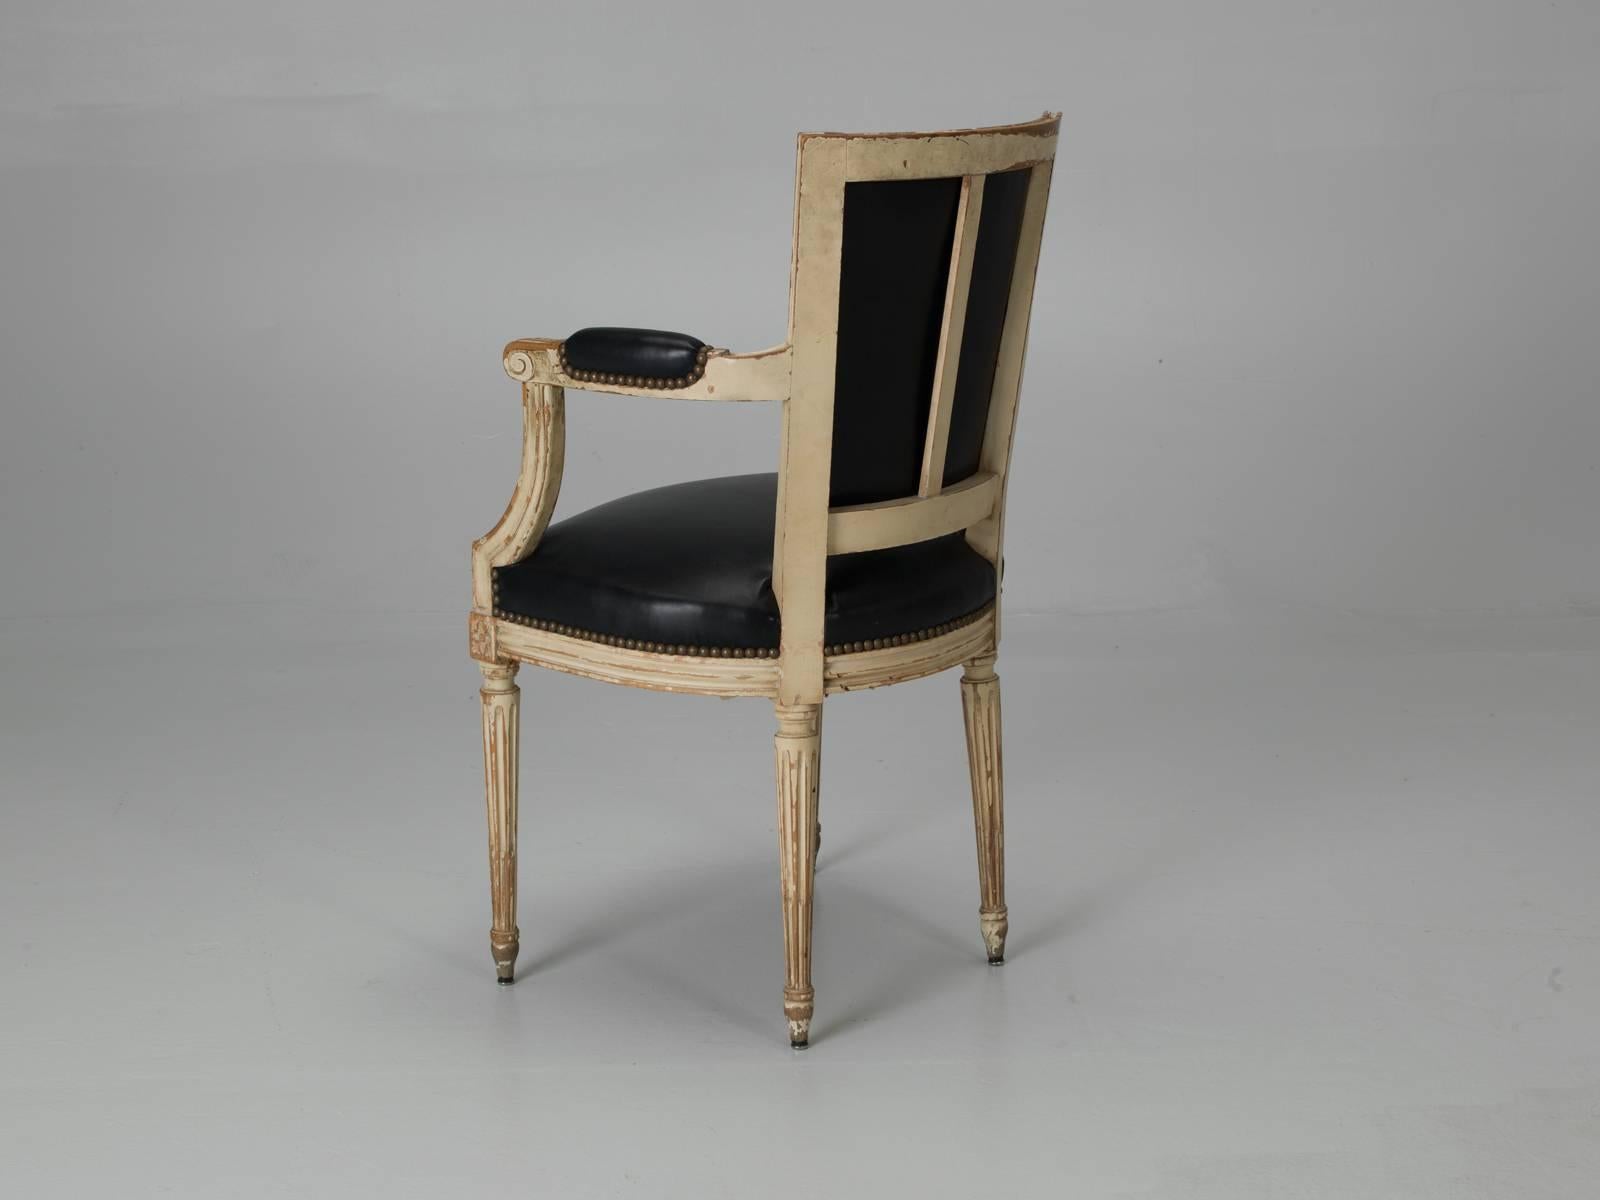 Antique Louis XVI Style French Dining Chairs in Original Paint and Black Leather (Frühes 20. Jahrhundert)